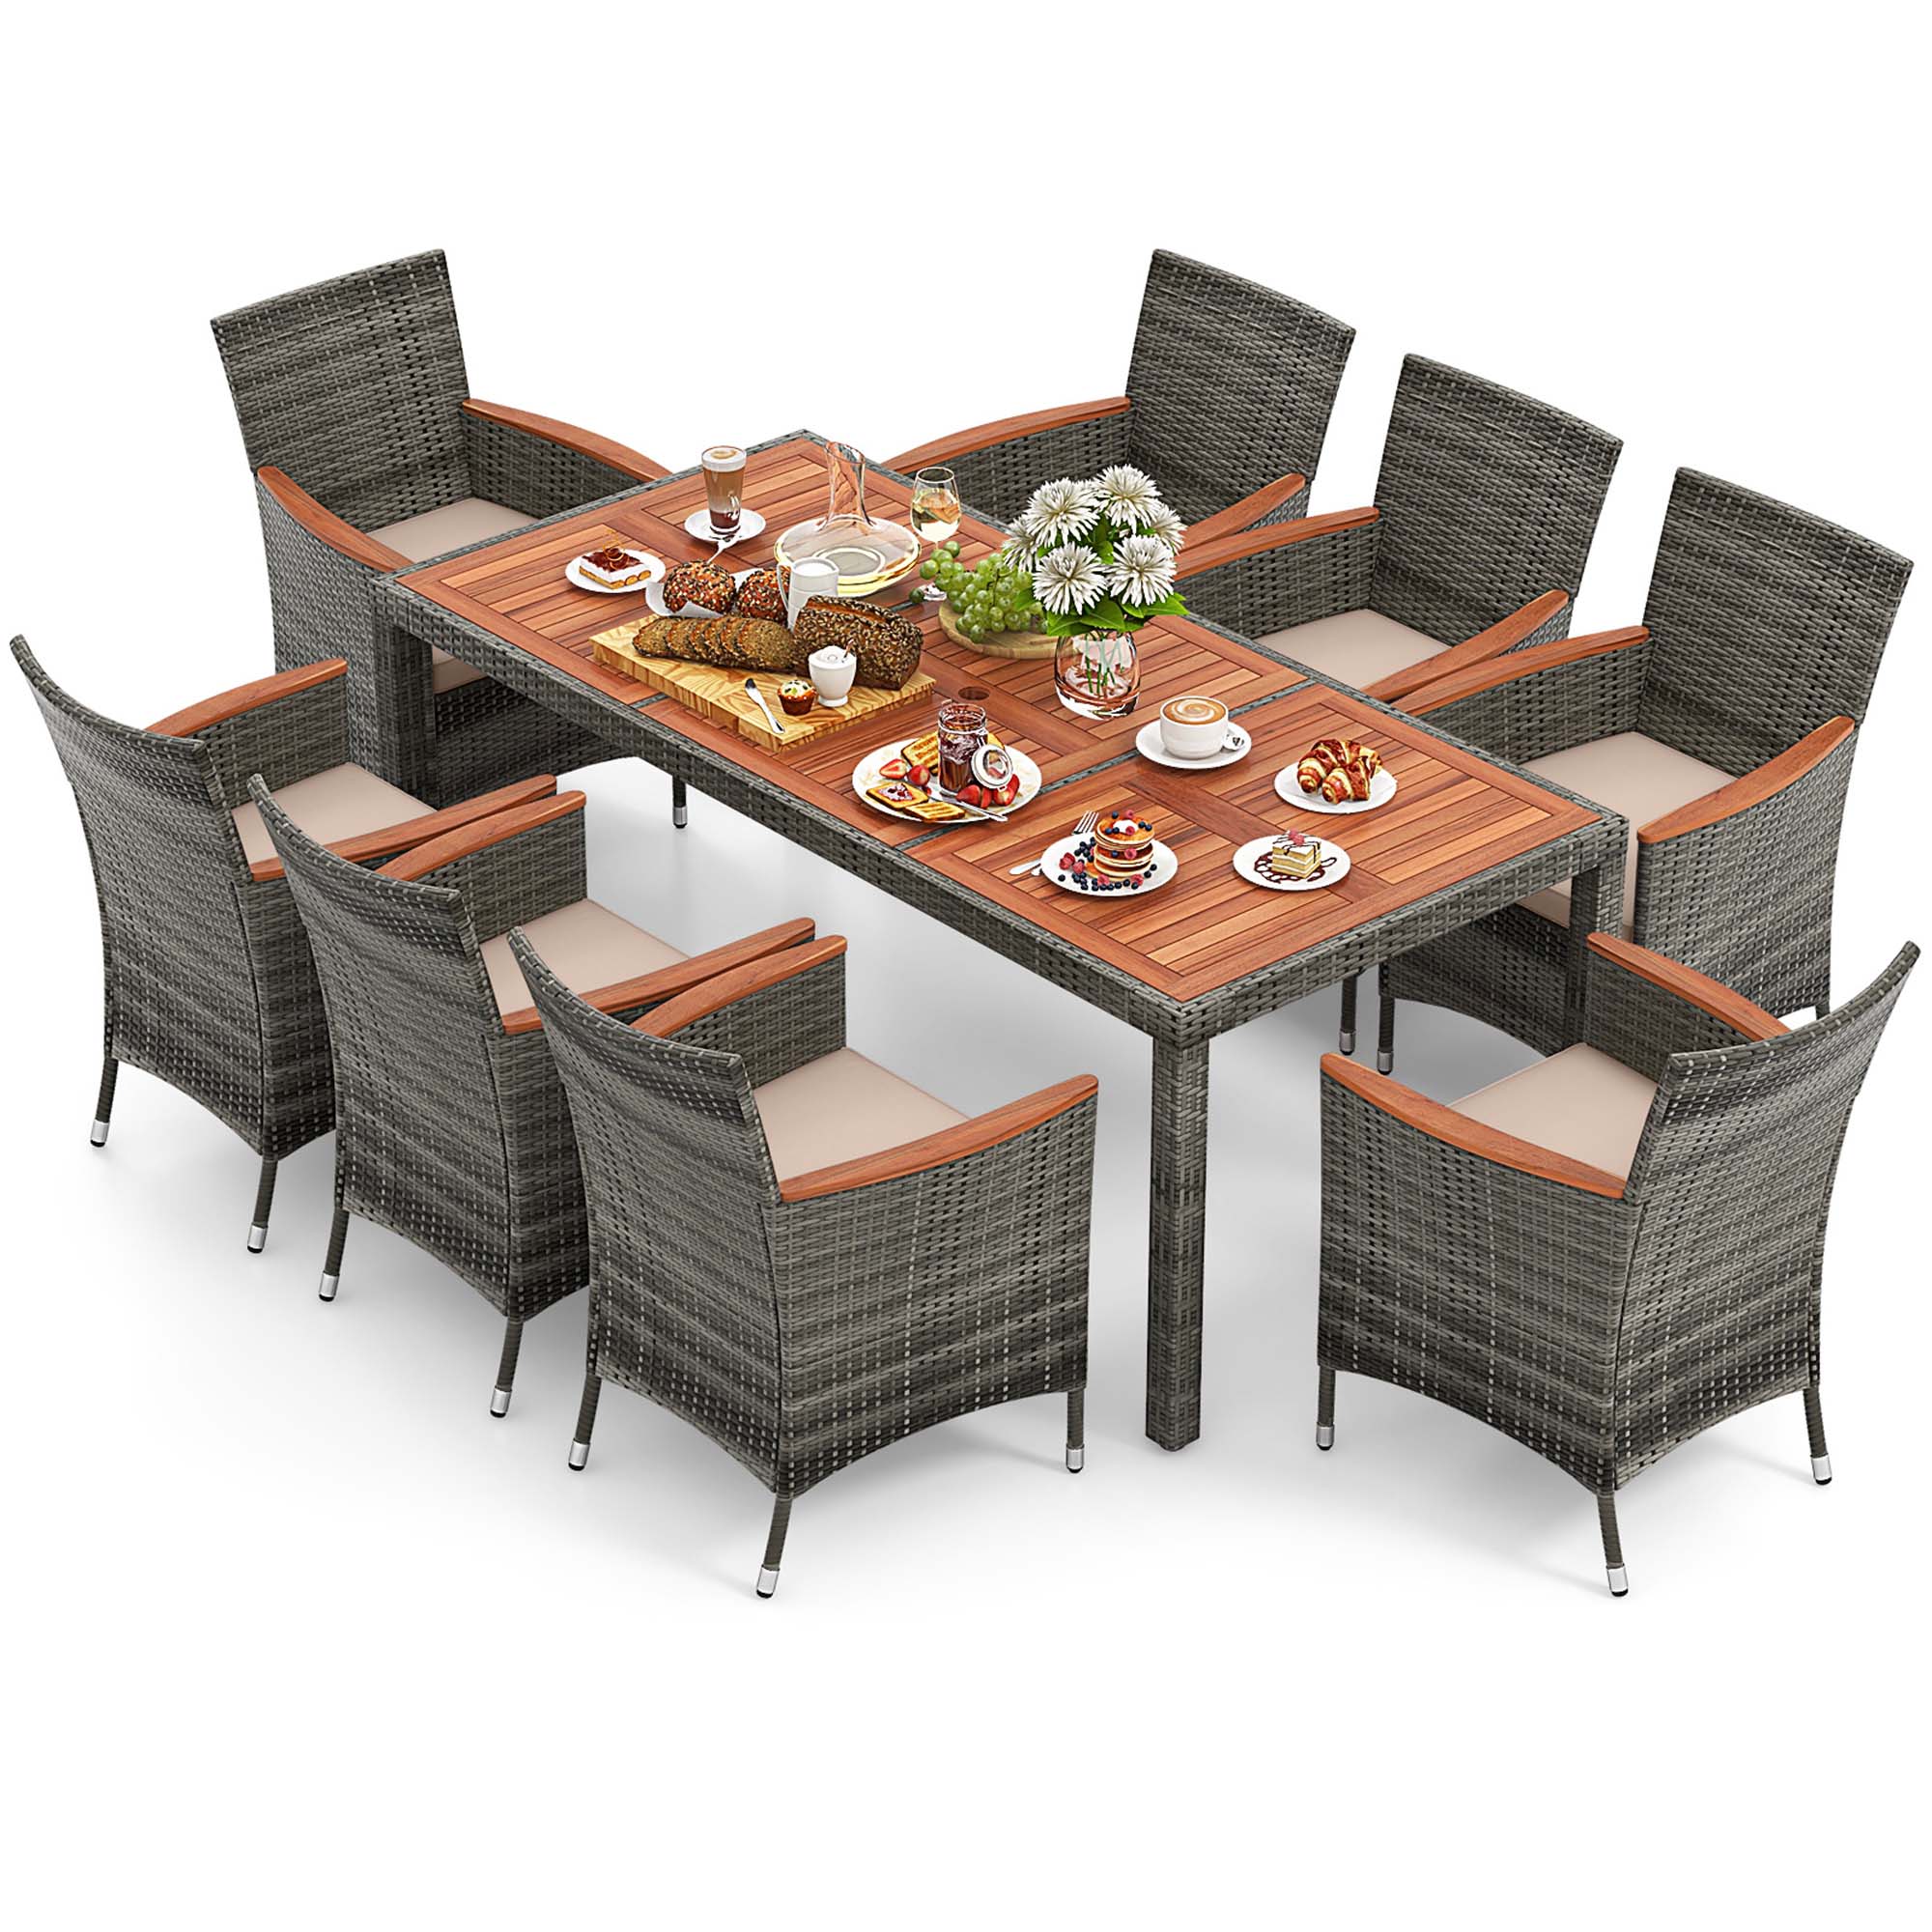 Costway 9PCS Patio Rattan Dining Set Acacia Wood Table Cushioned Chair Mix Gray - image 2 of 10